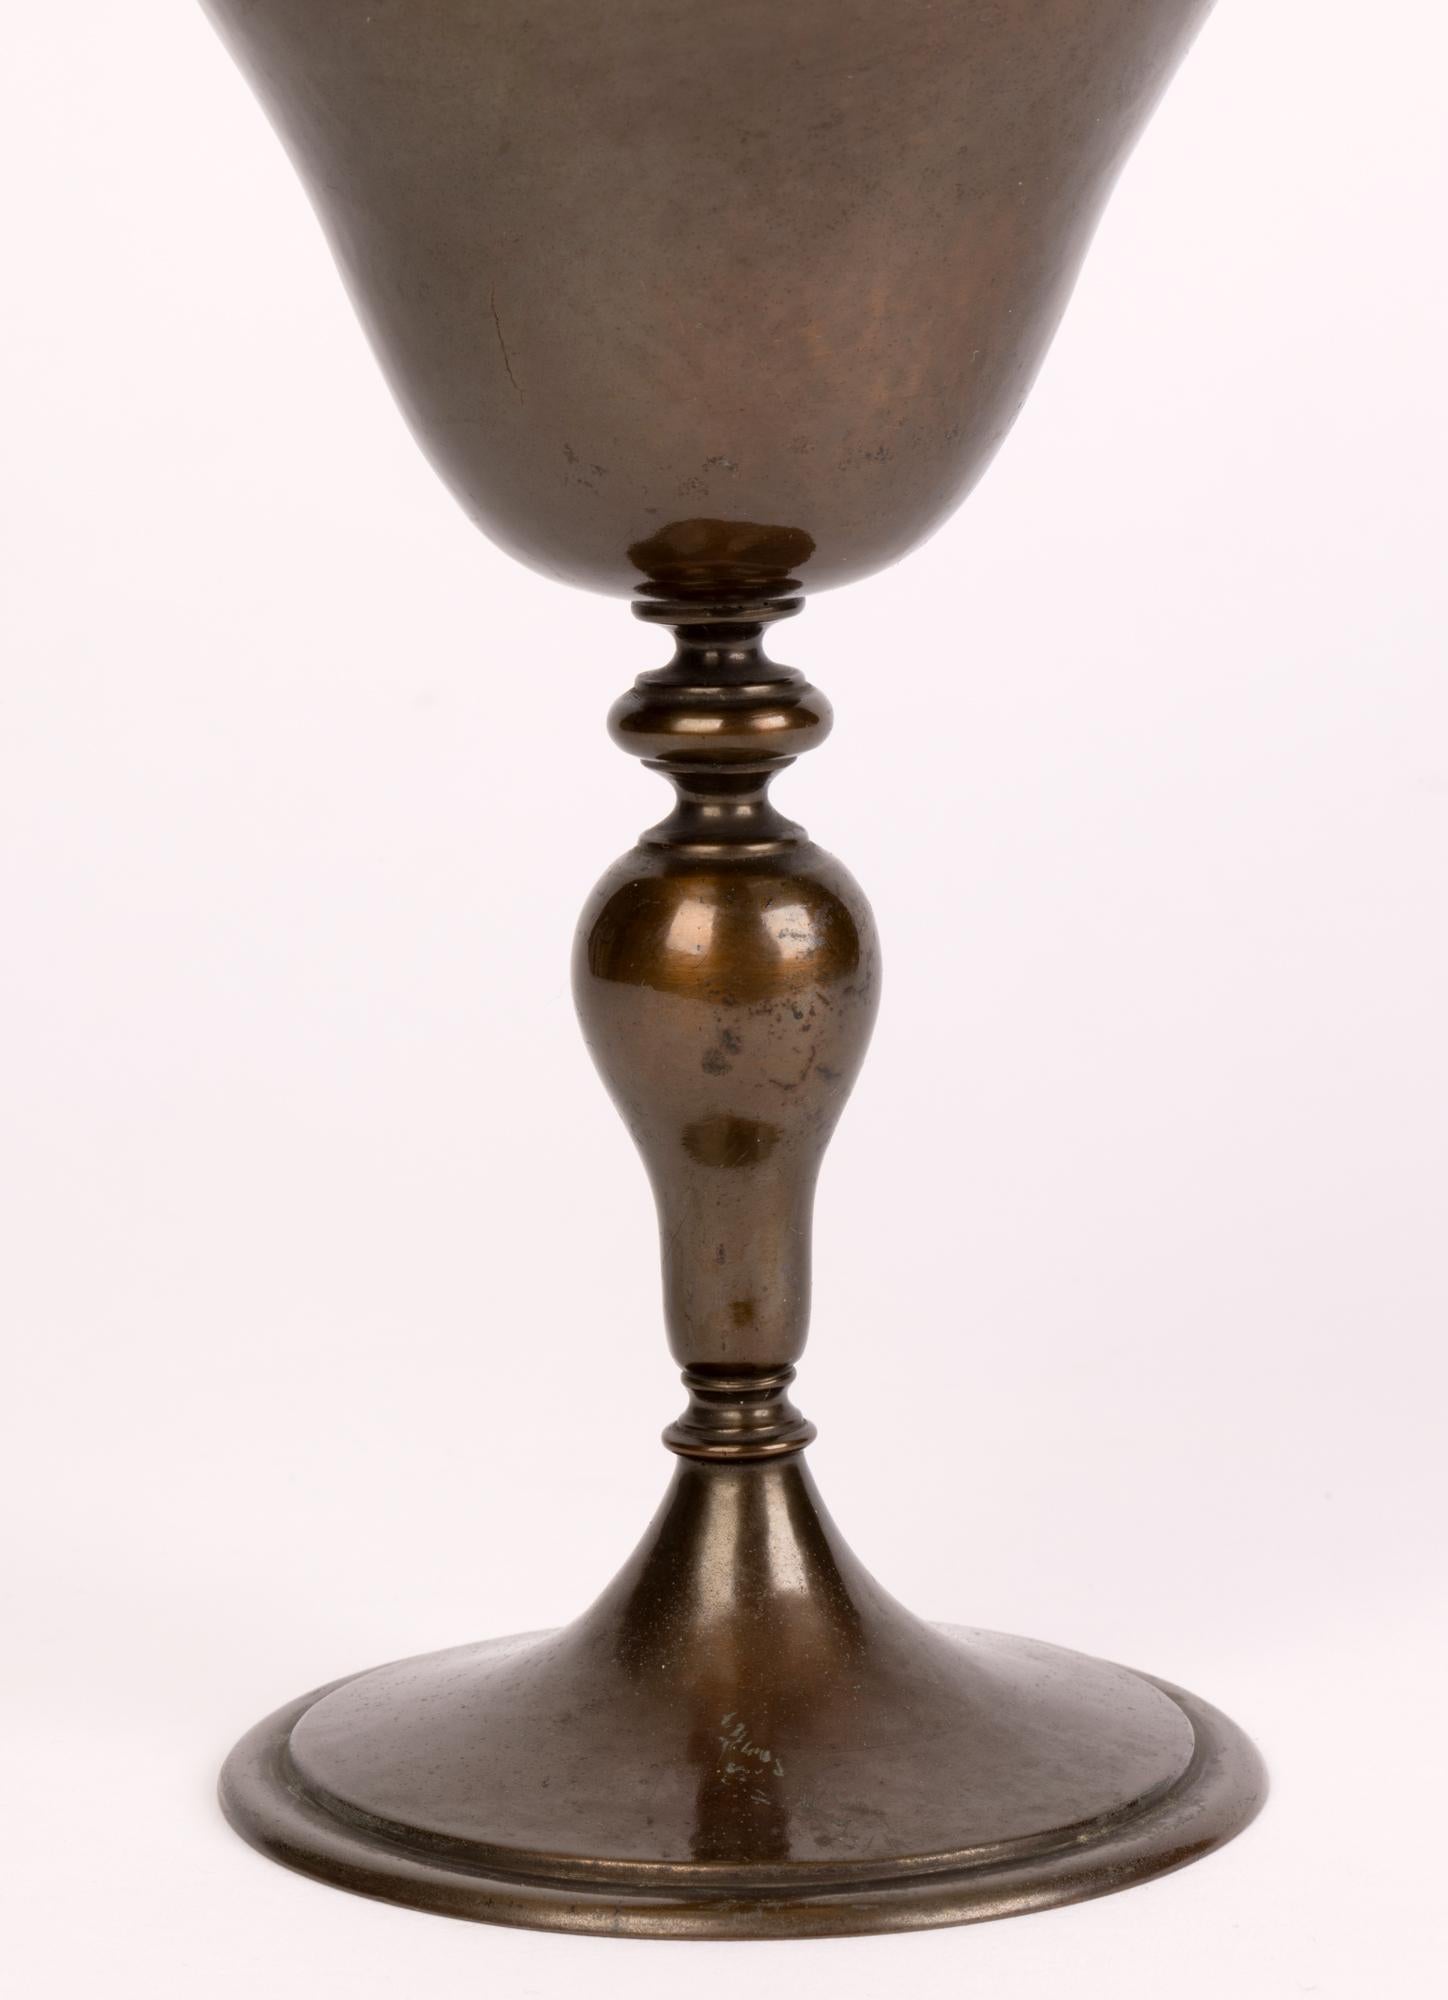 A very stylish Arts & Crafts with Gothic elements Edwardian hand crafted patinated copper lidded communion chalice dating from the early 20th Century. The chalice stands raised on a rounded pedestal foot with a ball knop stem and with a shaped body